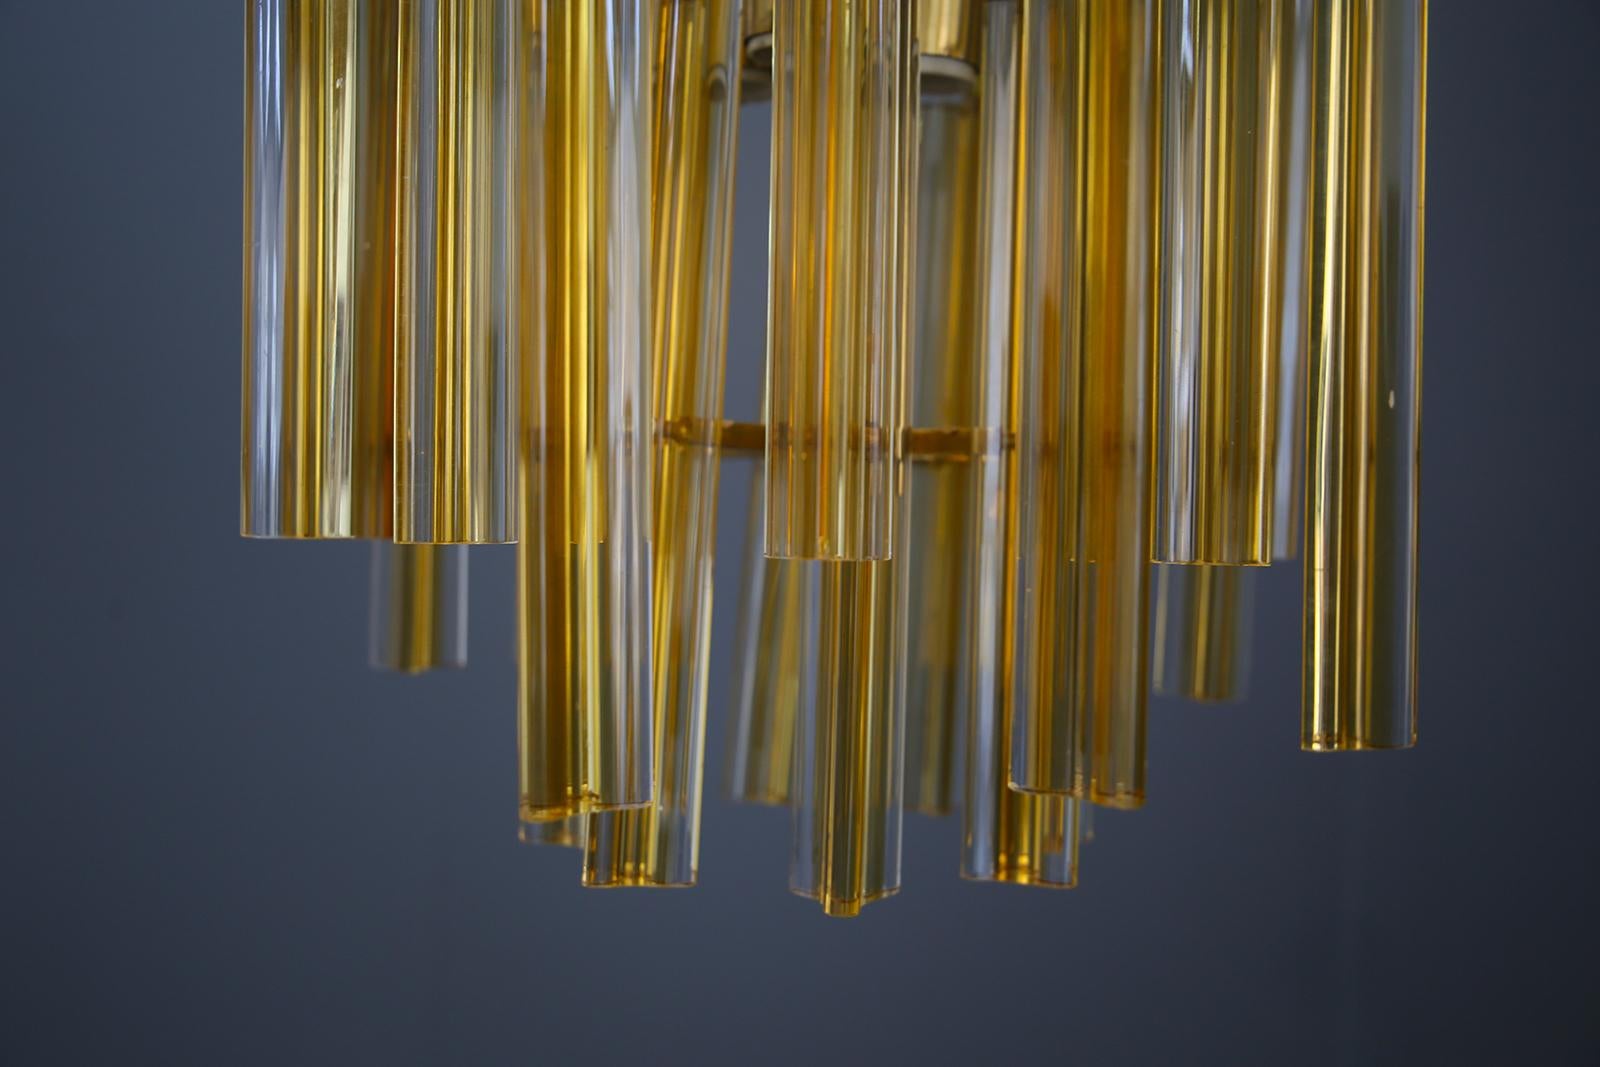 Elegant chandelier from the Venini factory in glass and brass from the 1950s. The chandelier is in perfect original condition. The pendant is composed of 24 parallelepipeds with a triangular base in solid gilded glass. The glasses are hand ground in